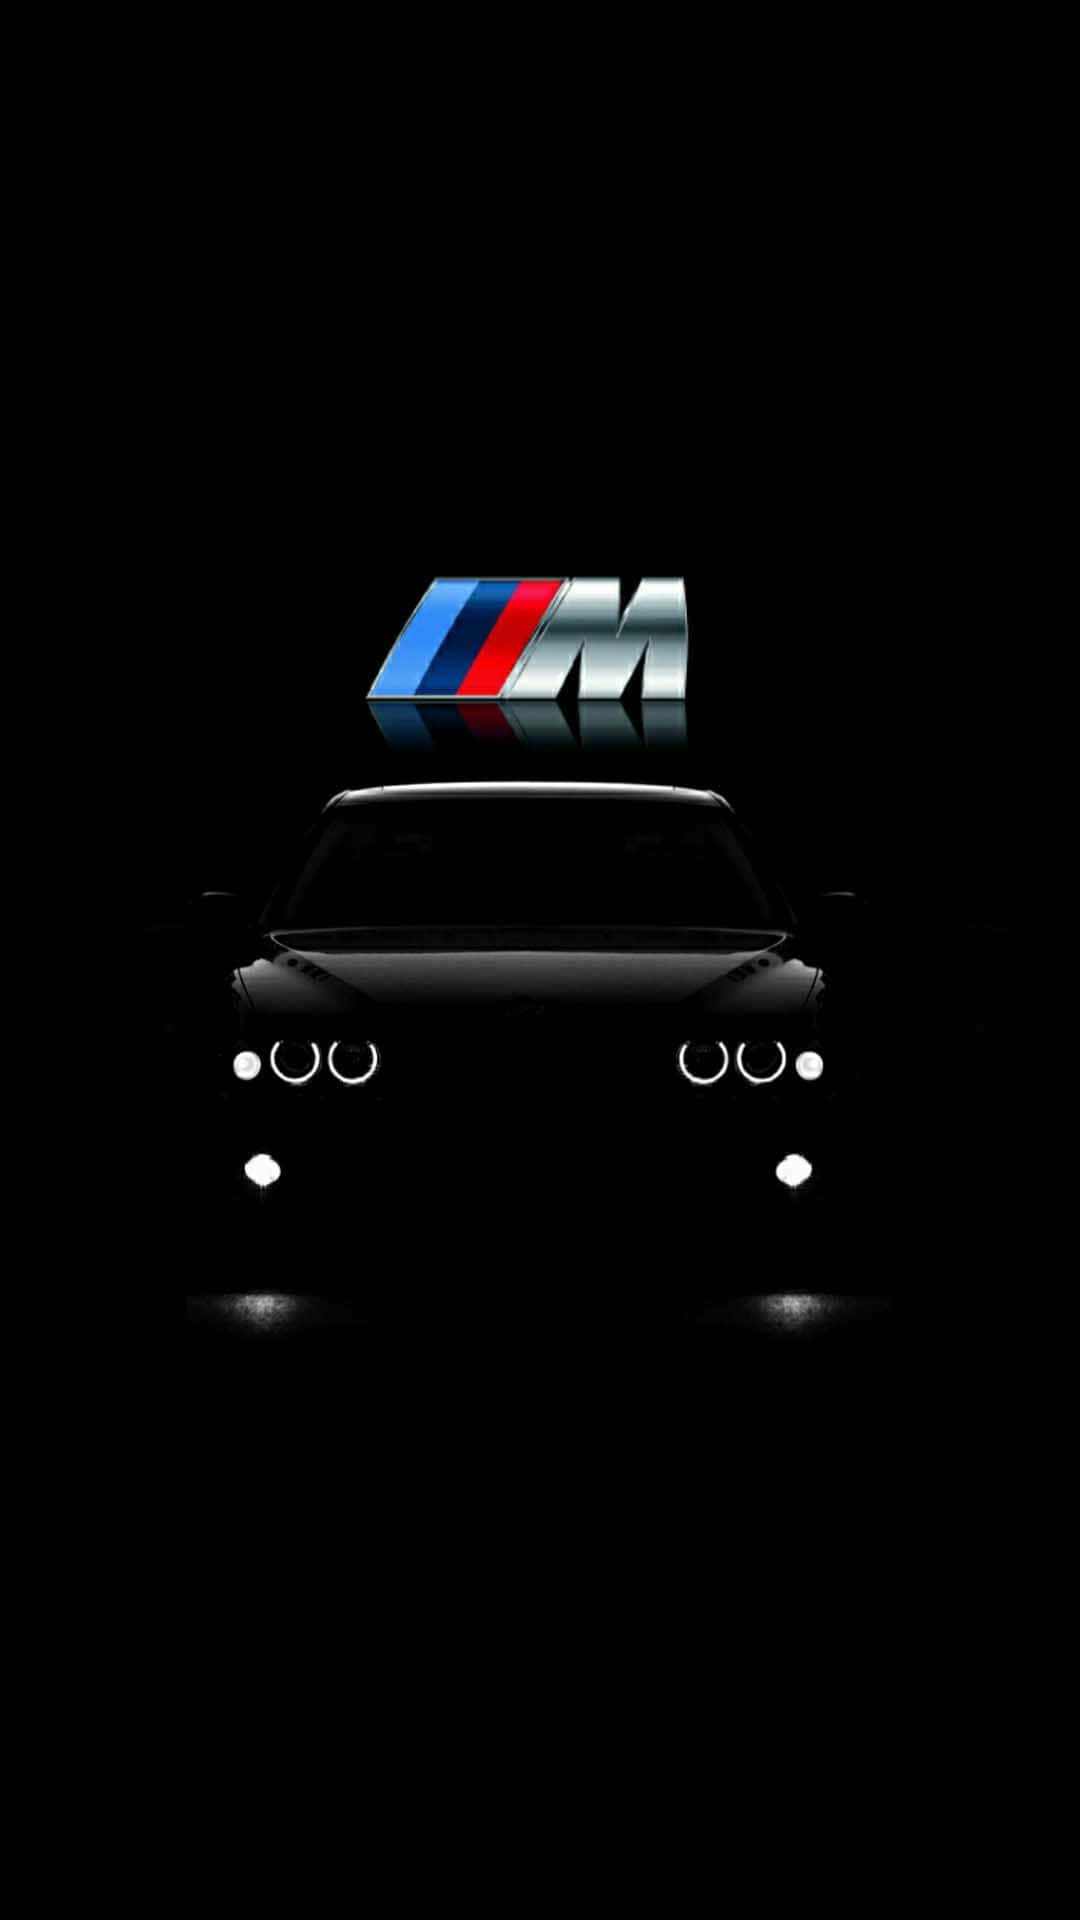 Enjoy The Bmw Life With A Sleek Iphone Background